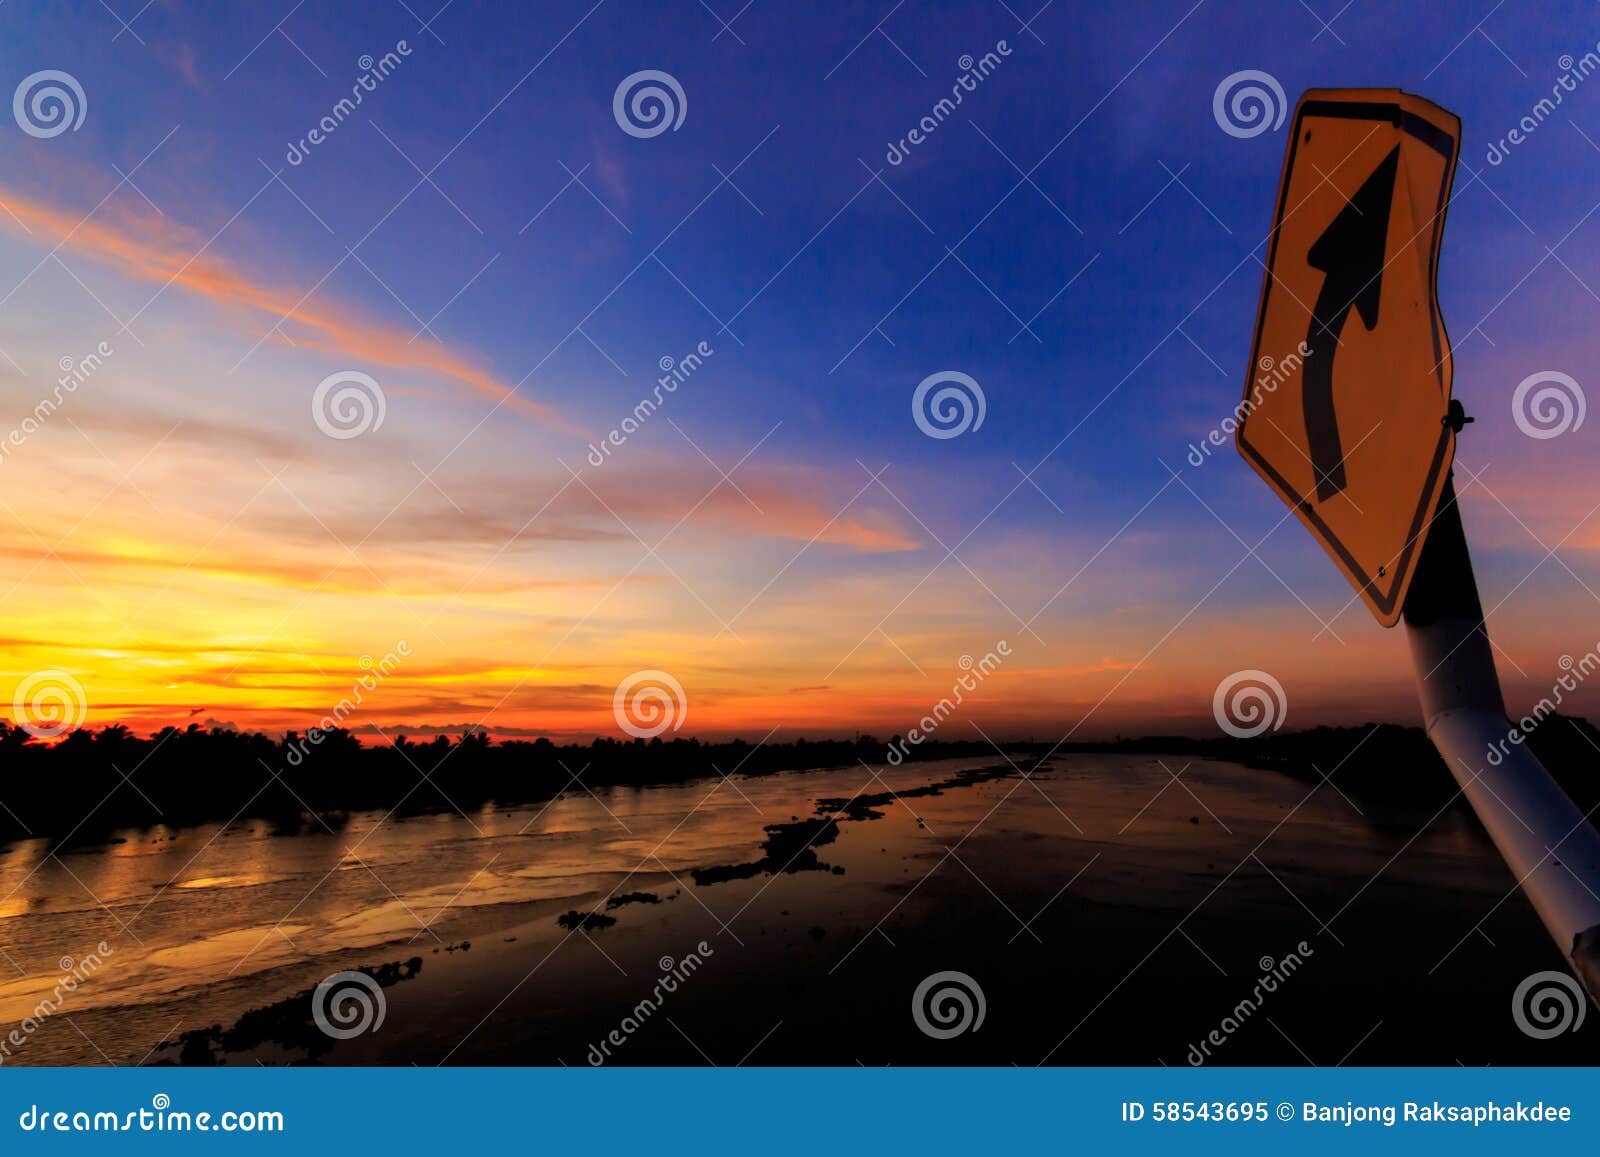 Look at the sunsets on the Tha Chin River in Thailand.